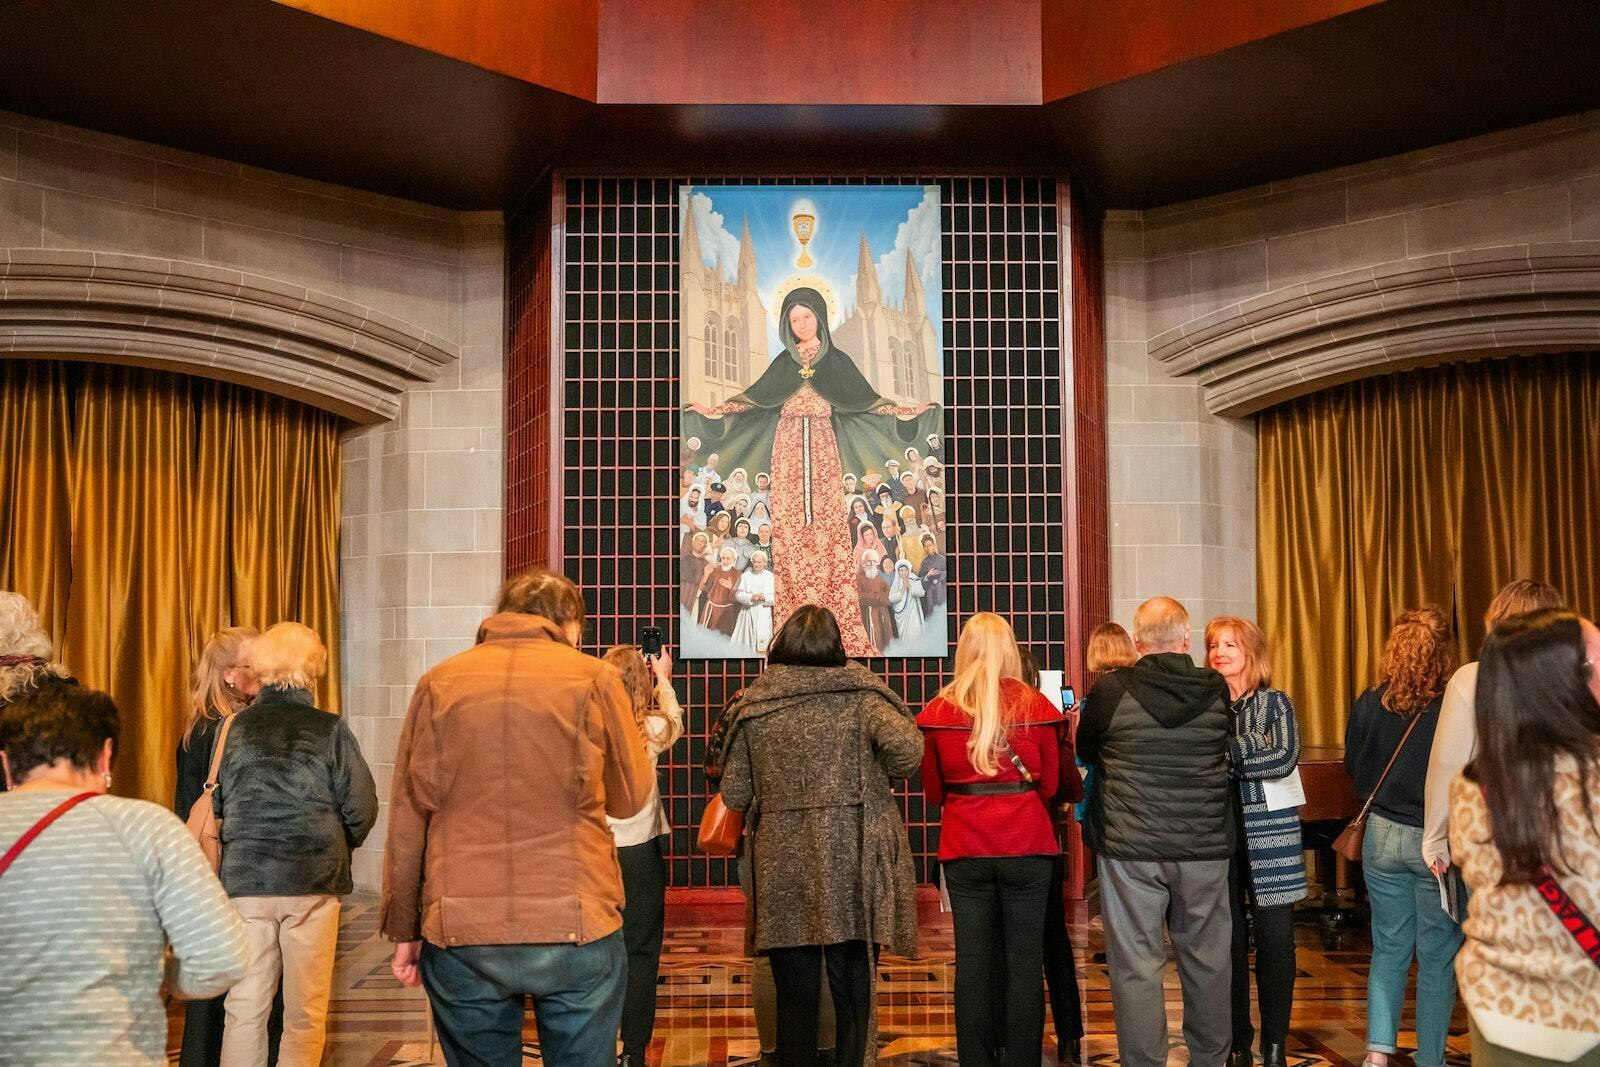 Faithful admire a new painting created by artist Christopher Darga, titled "Mary, Mother of the Church of Detroit." The painting depicts the Blessed Mother surrounded by some of the Church's greatest saints.